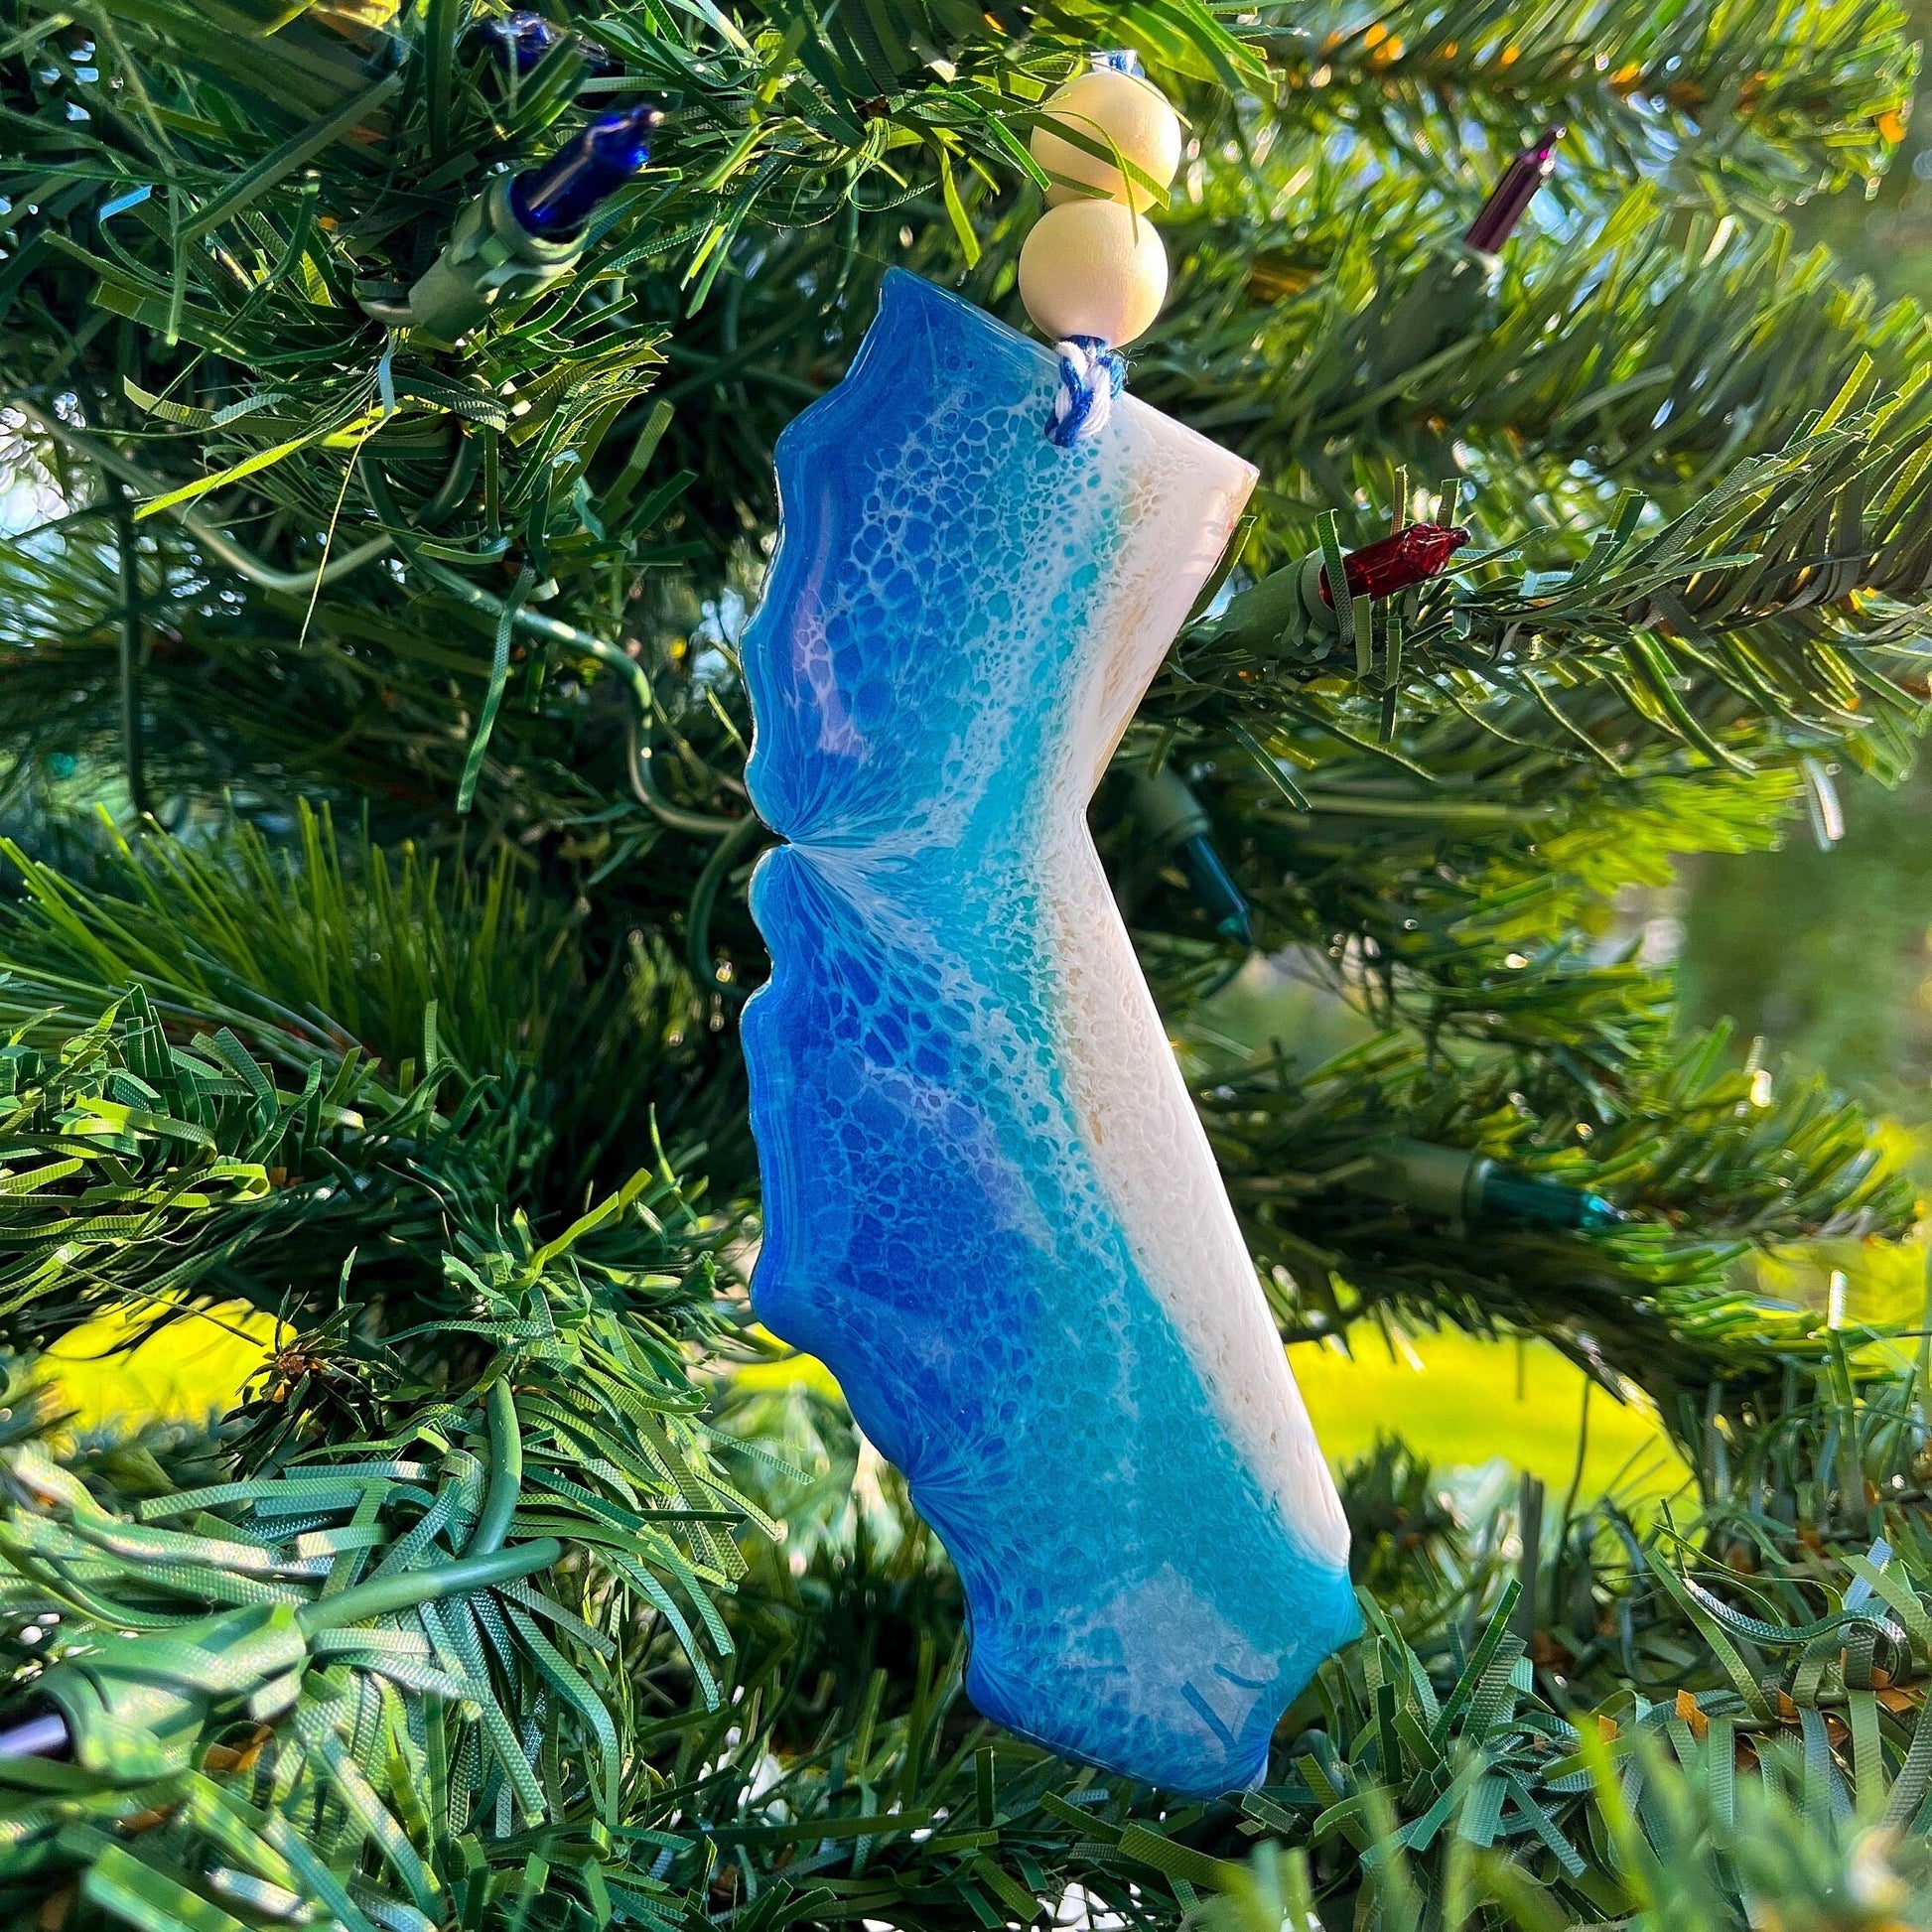 A california shaped wooden christmas ornament covered in layers of blue and teal ocean resin art resembling the waves of the ocean. Finished with baker&#39;s twine and two wooden beads and hanging on a christmas tree.